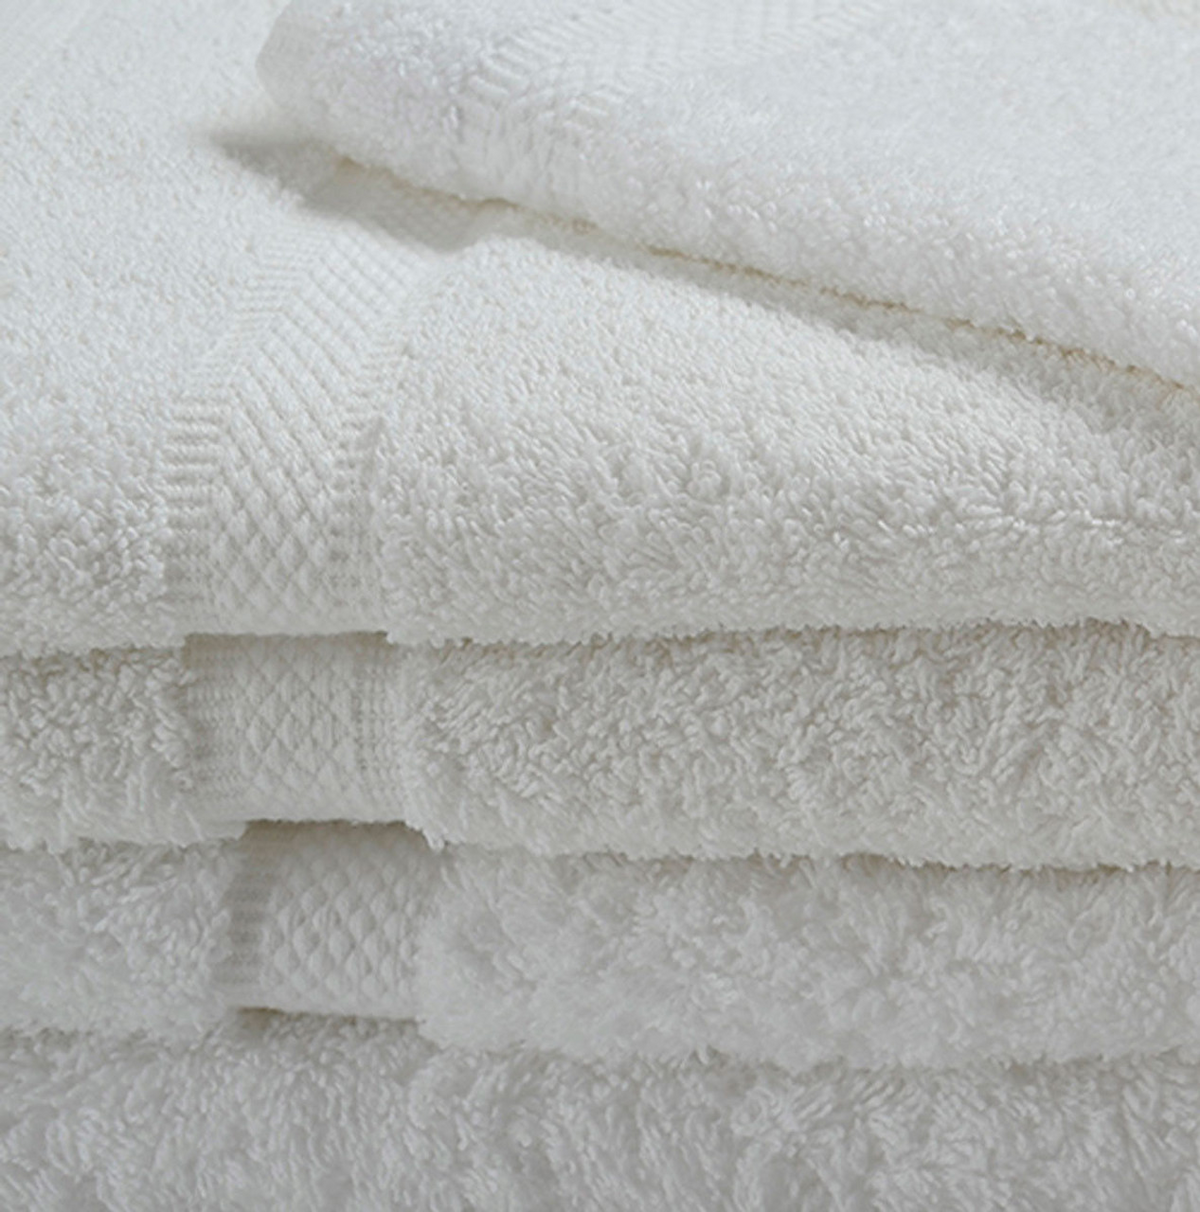 Washcloth (square Hemmed) - Oxford Imperiale Towel